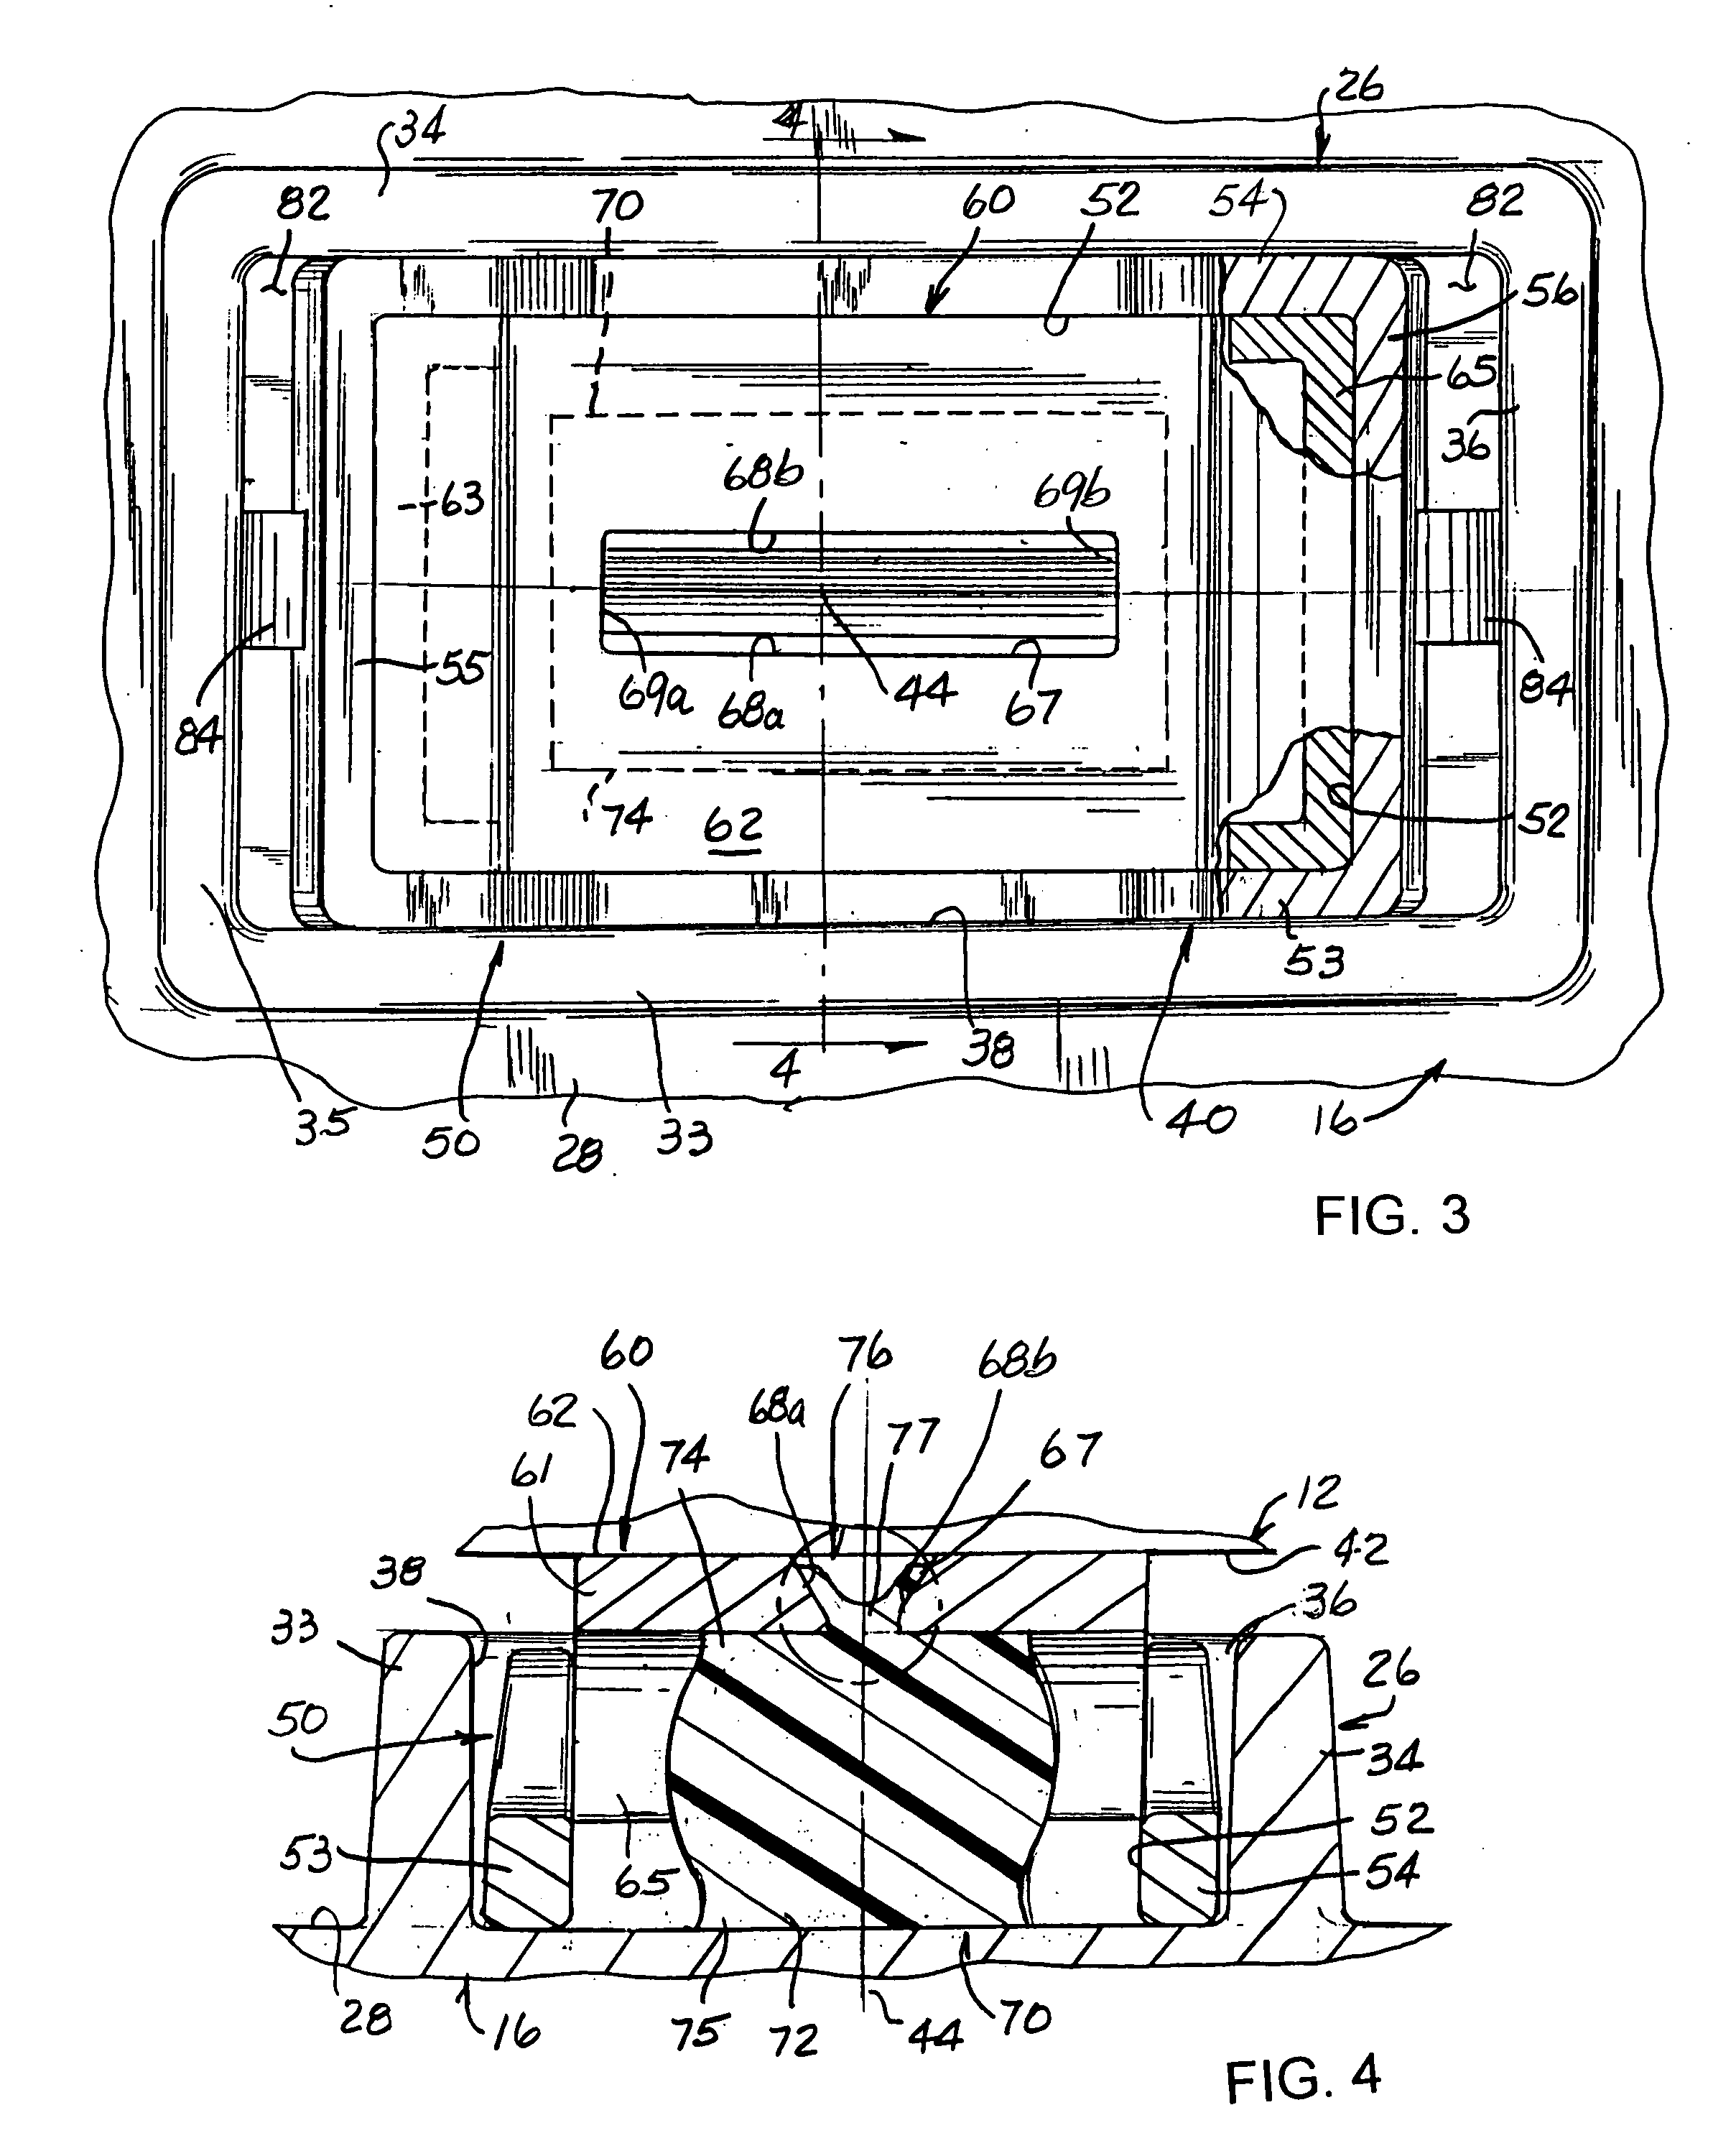 Constant contact side bearing assembly for a railcar